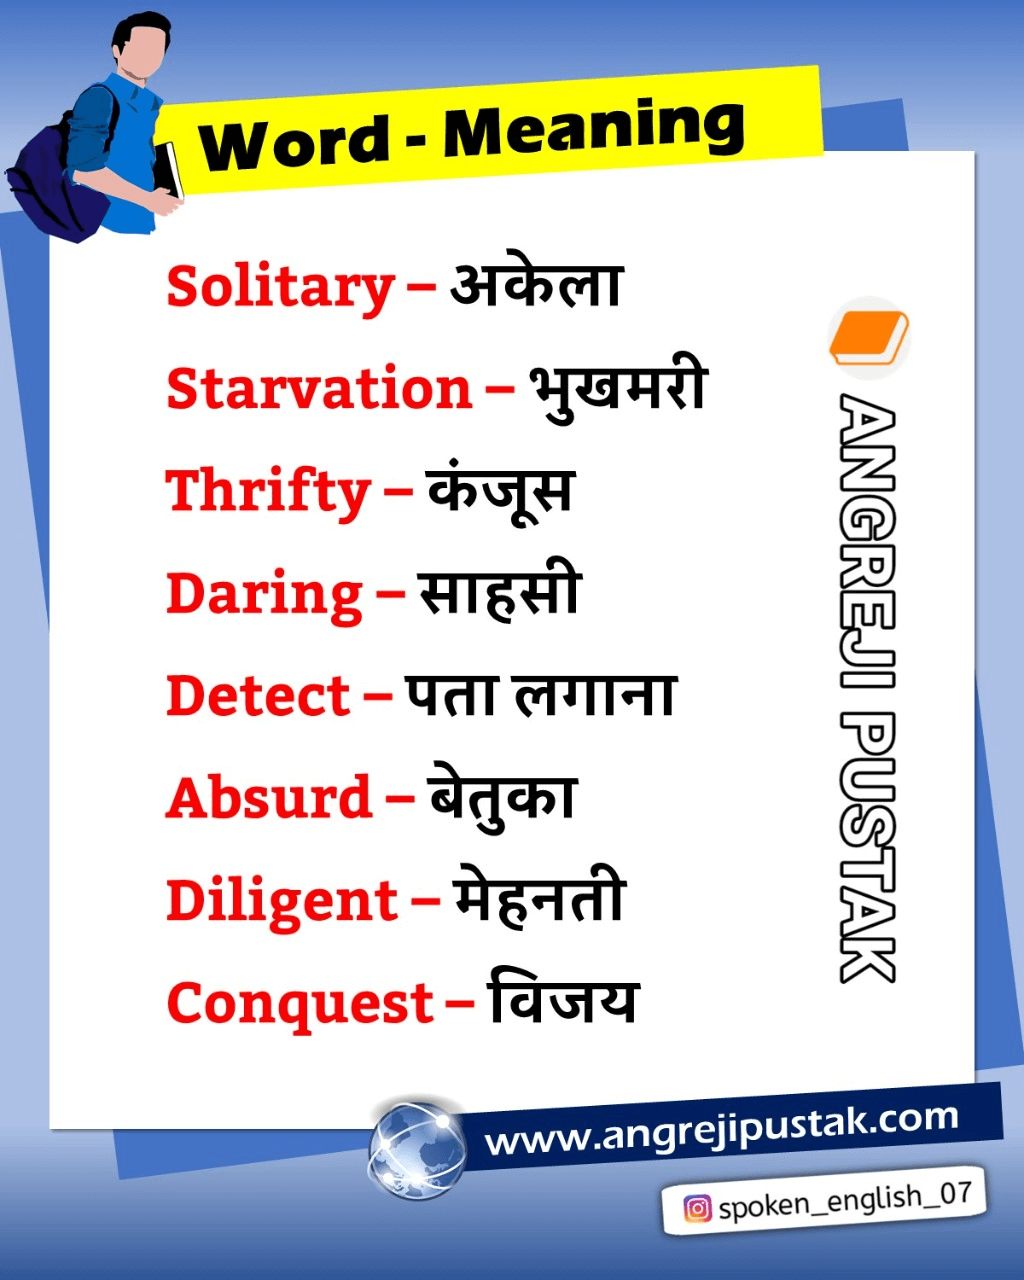 50 Word meaning English to Hindi | difficult words in hindi and english